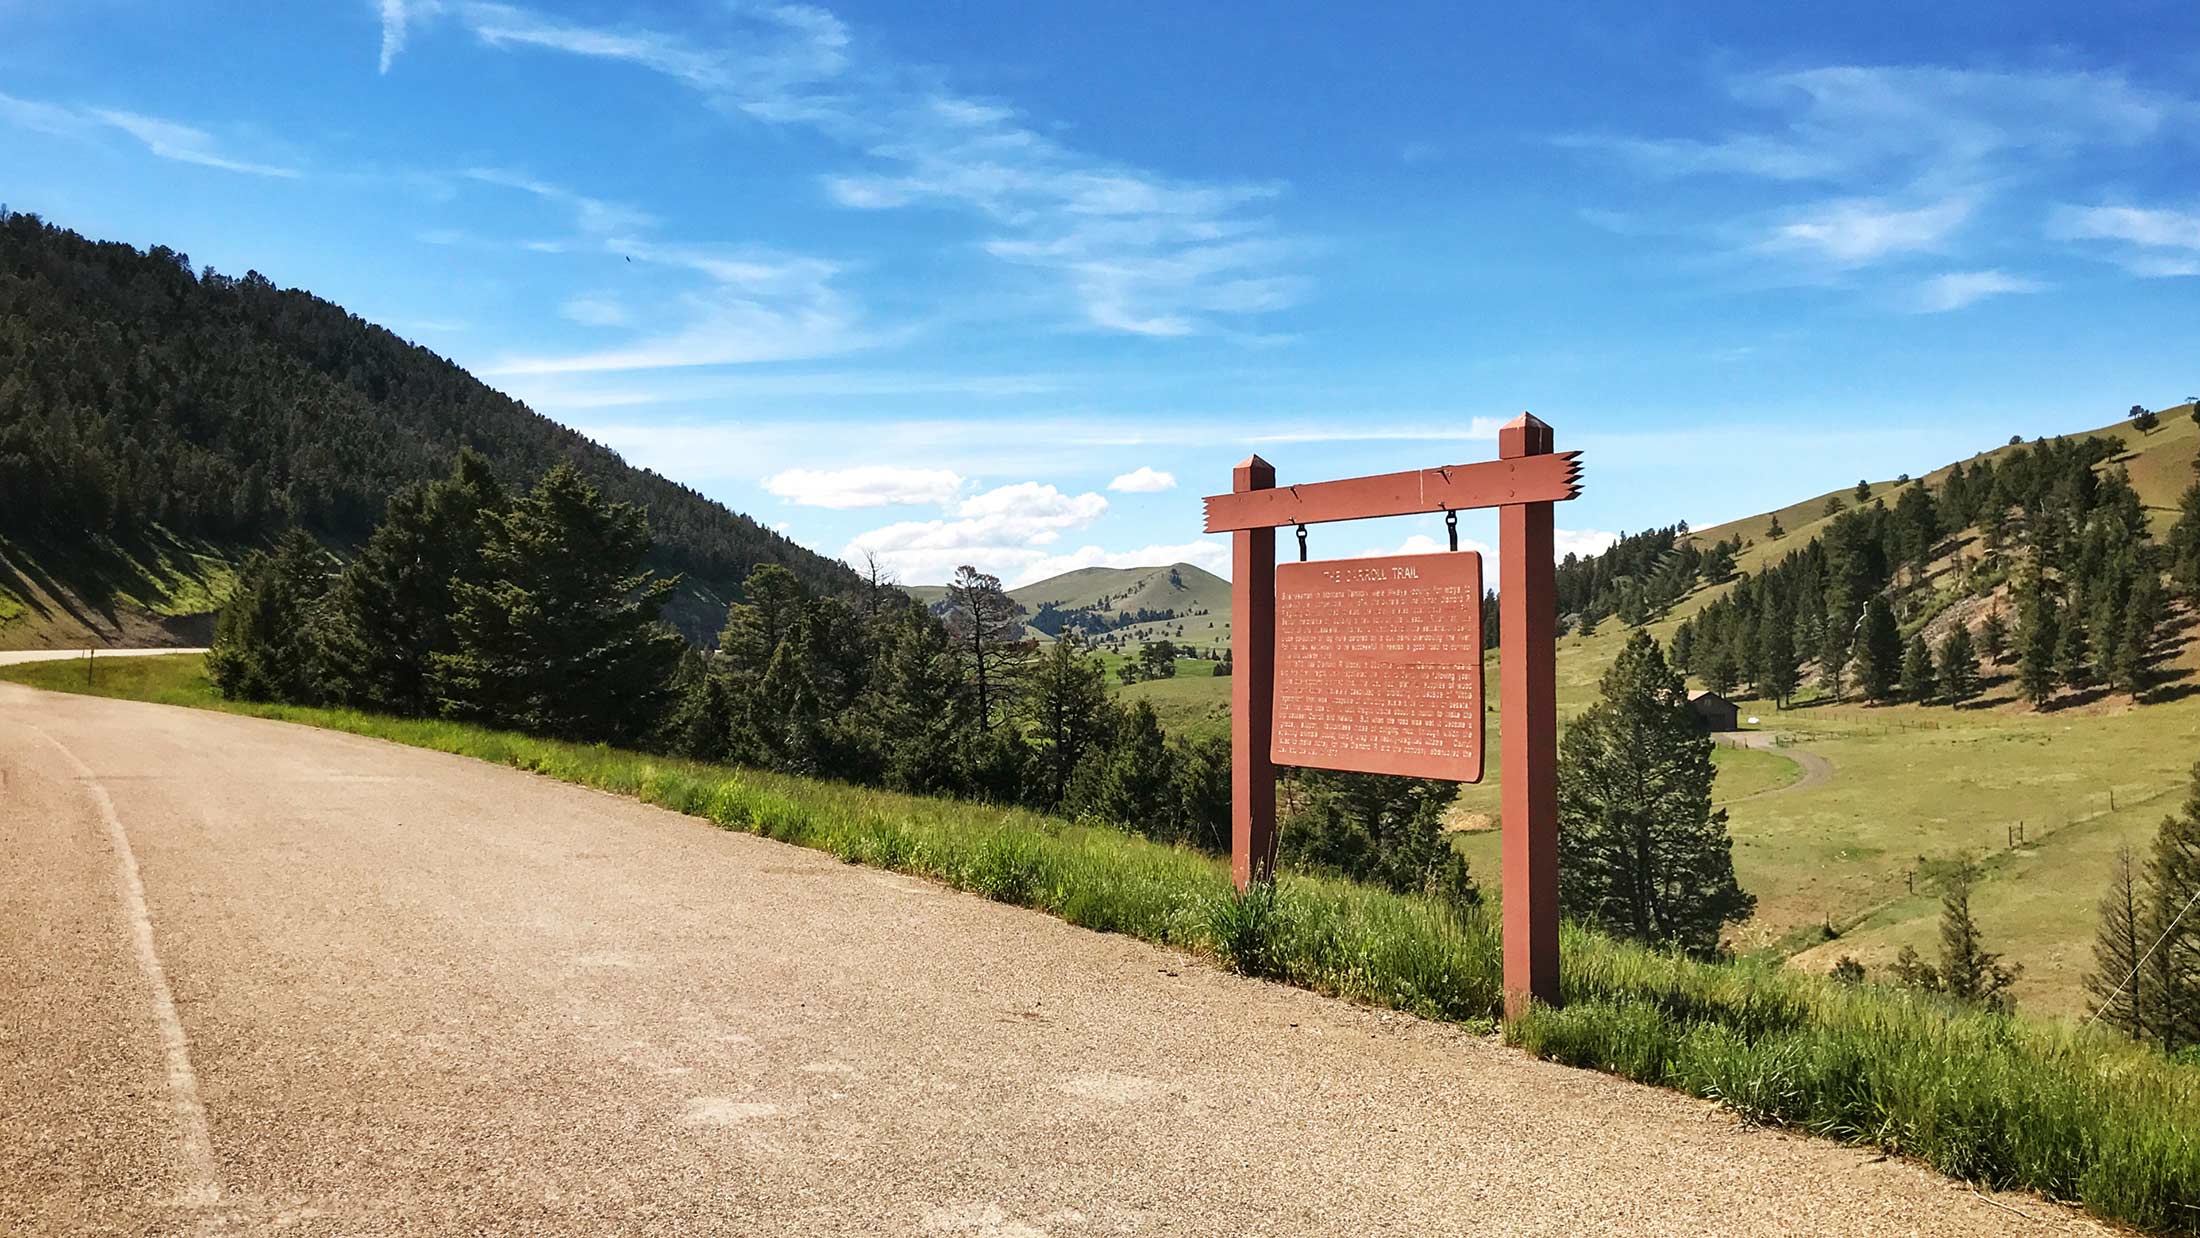 The Carroll Trail ran through the Little Belt Mountains right about where Highway 12 exists now. This sign has been placed here to commemorate its significance and the people who forged it. 